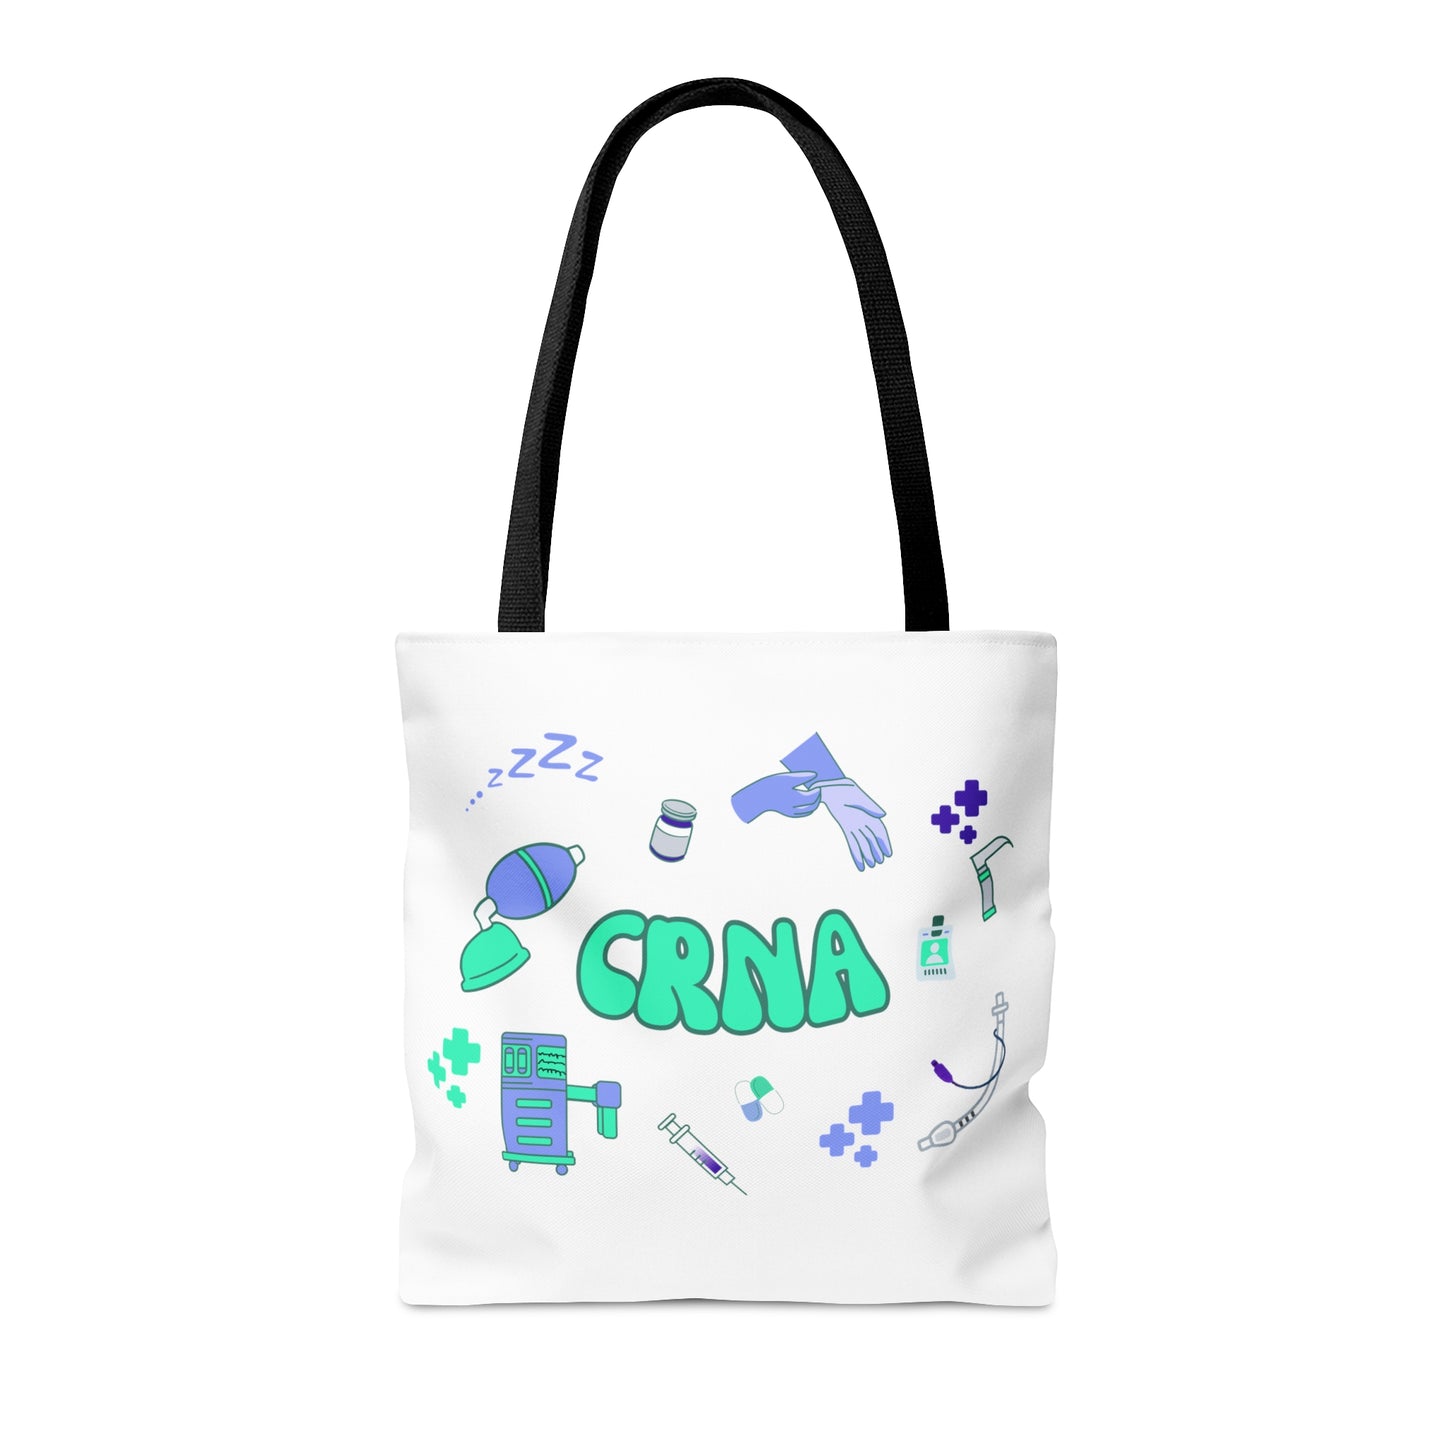 CRNA Anesthesia tote bag, CRNA, Nurse Anesthetist, Anesthesiologist, SRNA, Resident, Doctor, new CRNA student gift.